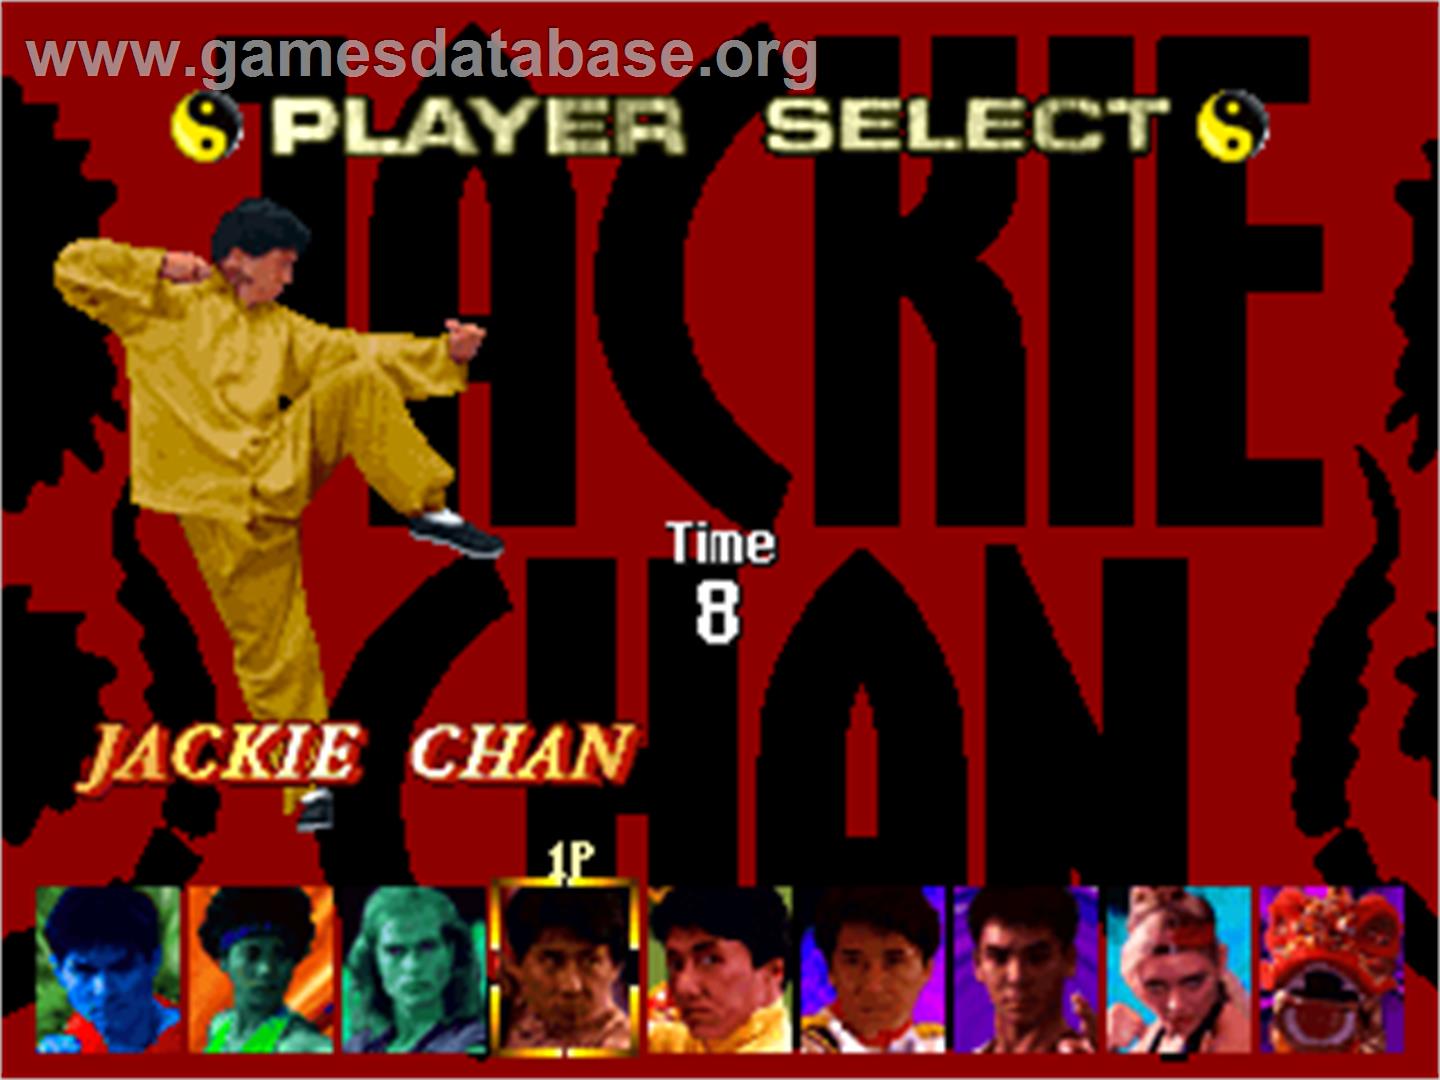 Jackie Chan in Fists of Fire - Arcade - Artwork - Select Screen